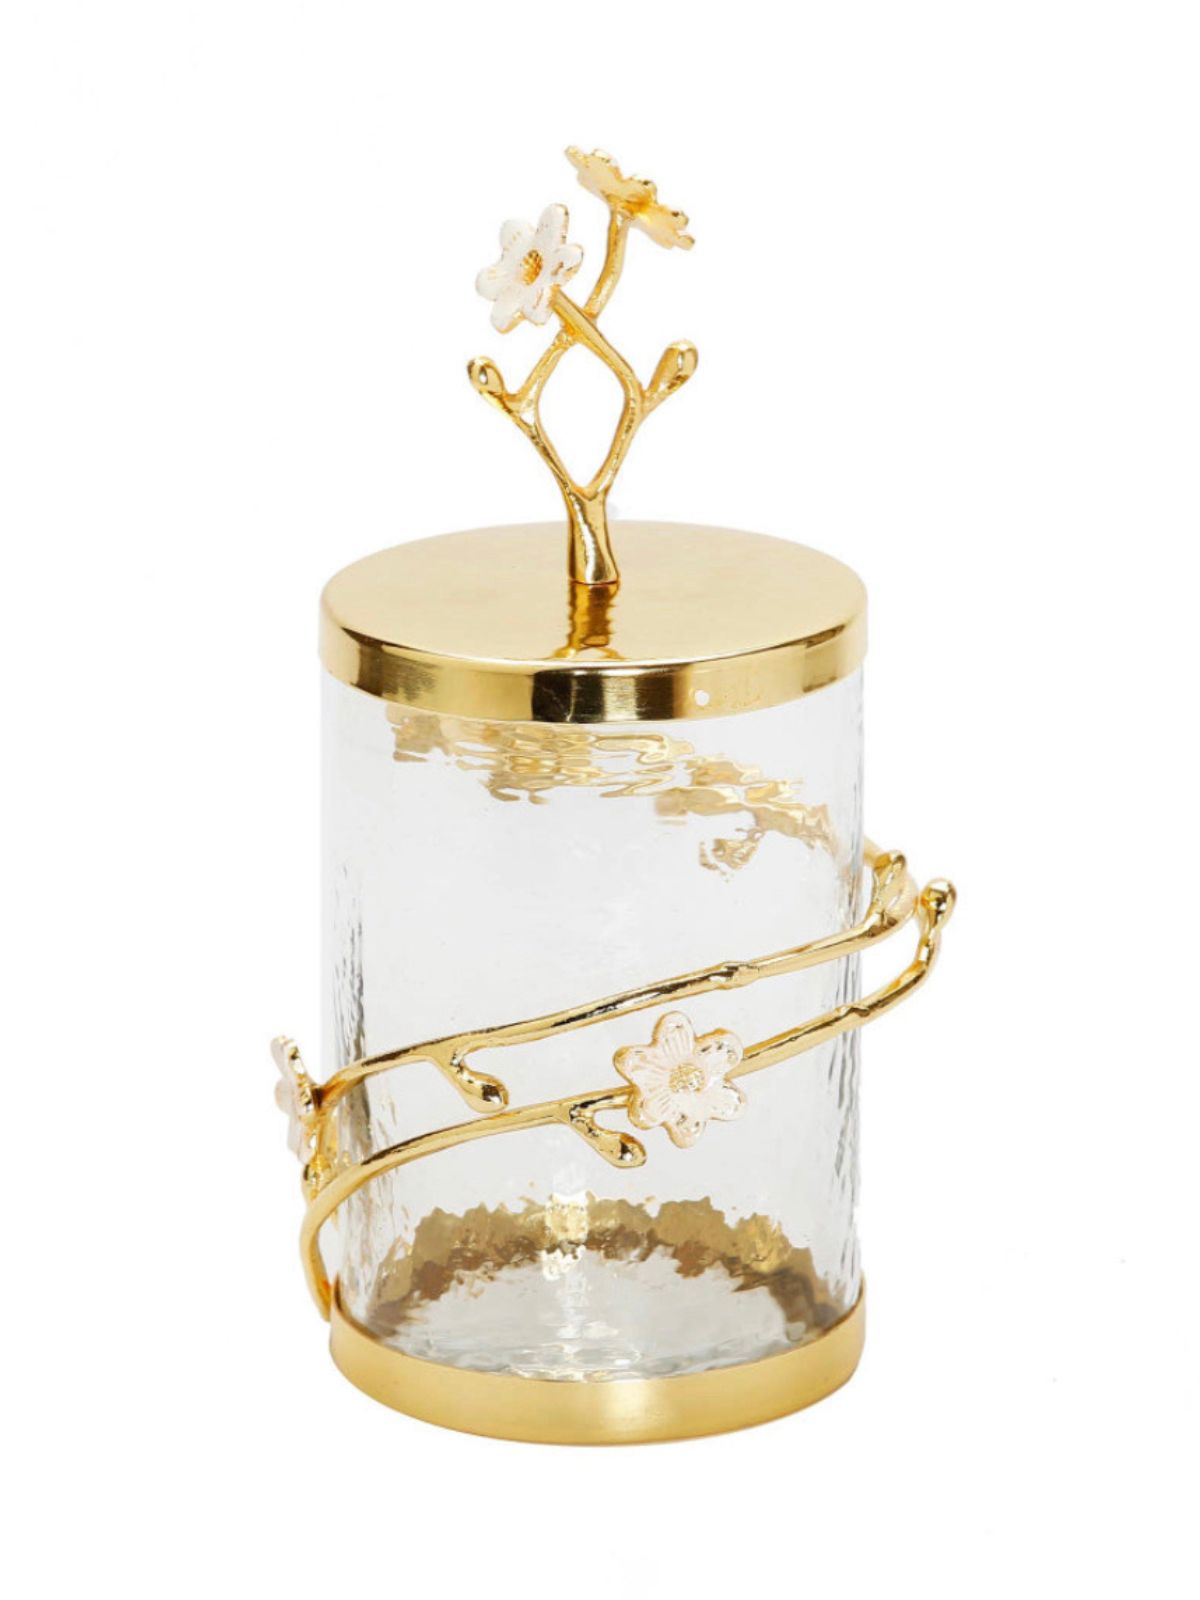 10H Luxury Glass Canister with Enamel Cherry Blossom Flower Design and Gold Lid - KYA Home Decor. 